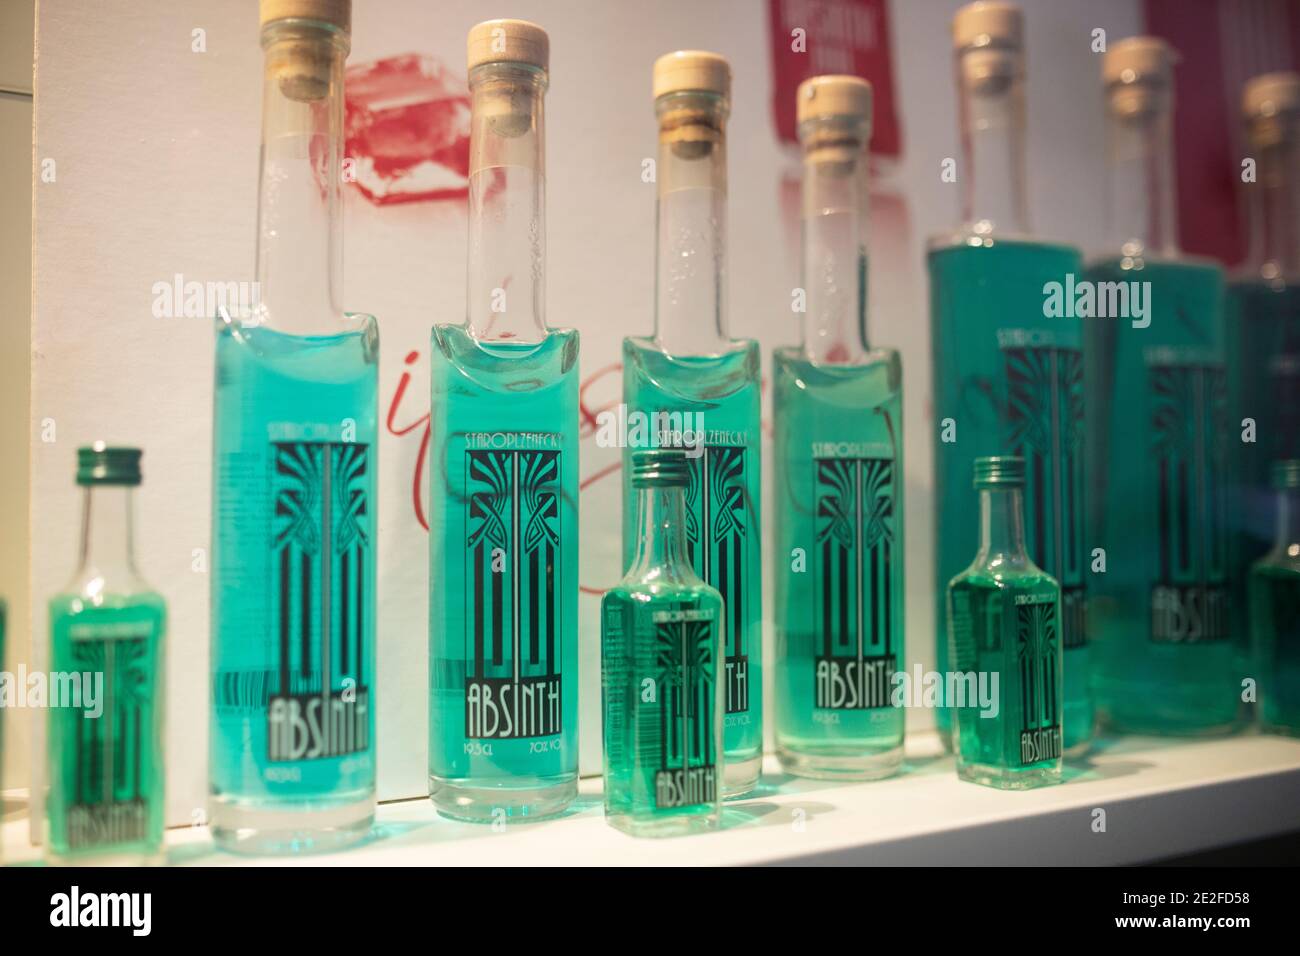 Bottles of absinthe for sale in the window of a shop in Prague, Czechia. Stock Photo